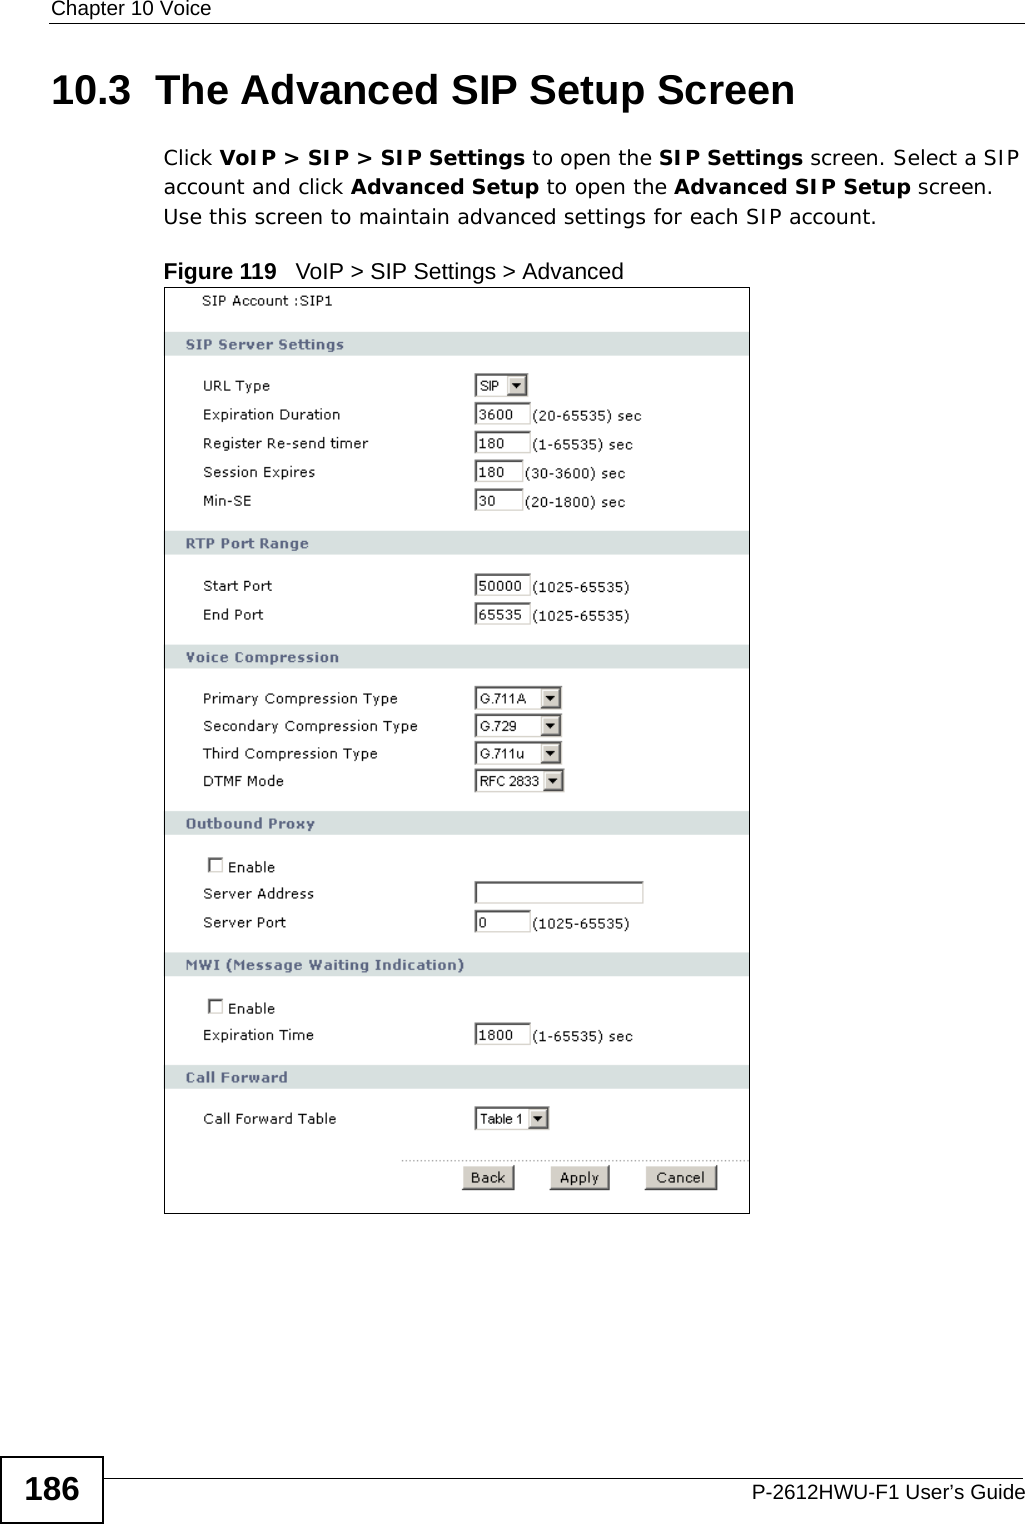 Chapter 10 VoiceP-2612HWU-F1 User’s Guide18610.3  The Advanced SIP Setup Screen Click VoIP &gt; SIP &gt; SIP Settings to open the SIP Settings screen. Select a SIP account and click Advanced Setup to open the Advanced SIP Setup screen. Use this screen to maintain advanced settings for each SIP account. Figure 119   VoIP &gt; SIP Settings &gt; Advanced